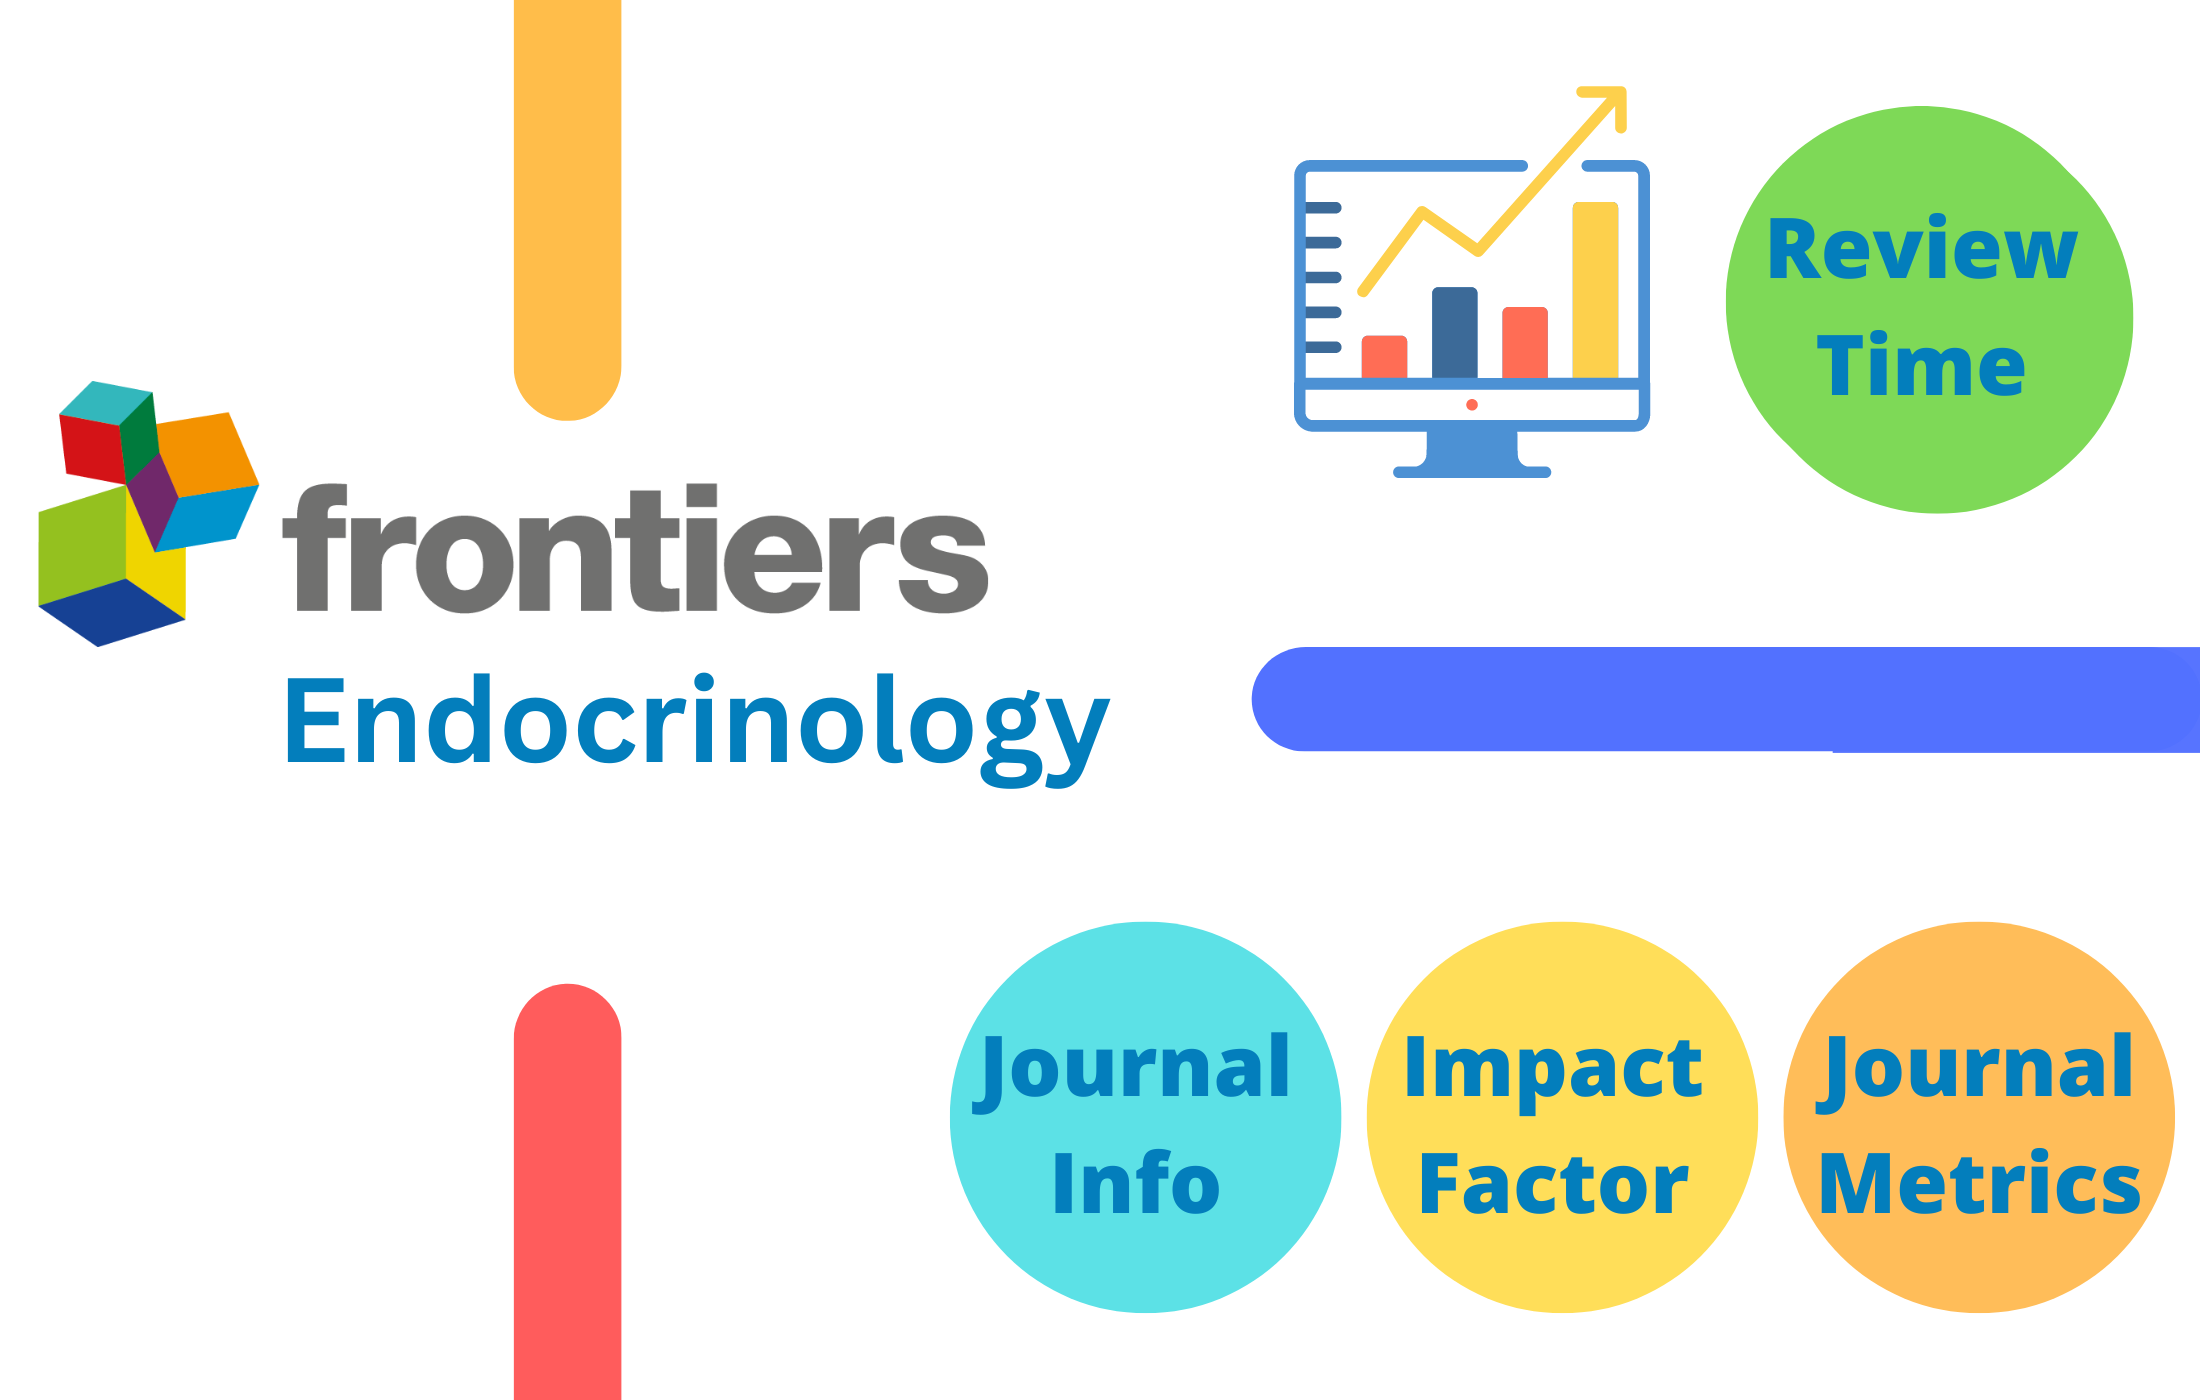 Frontiers in Endocrinology Impact Factor